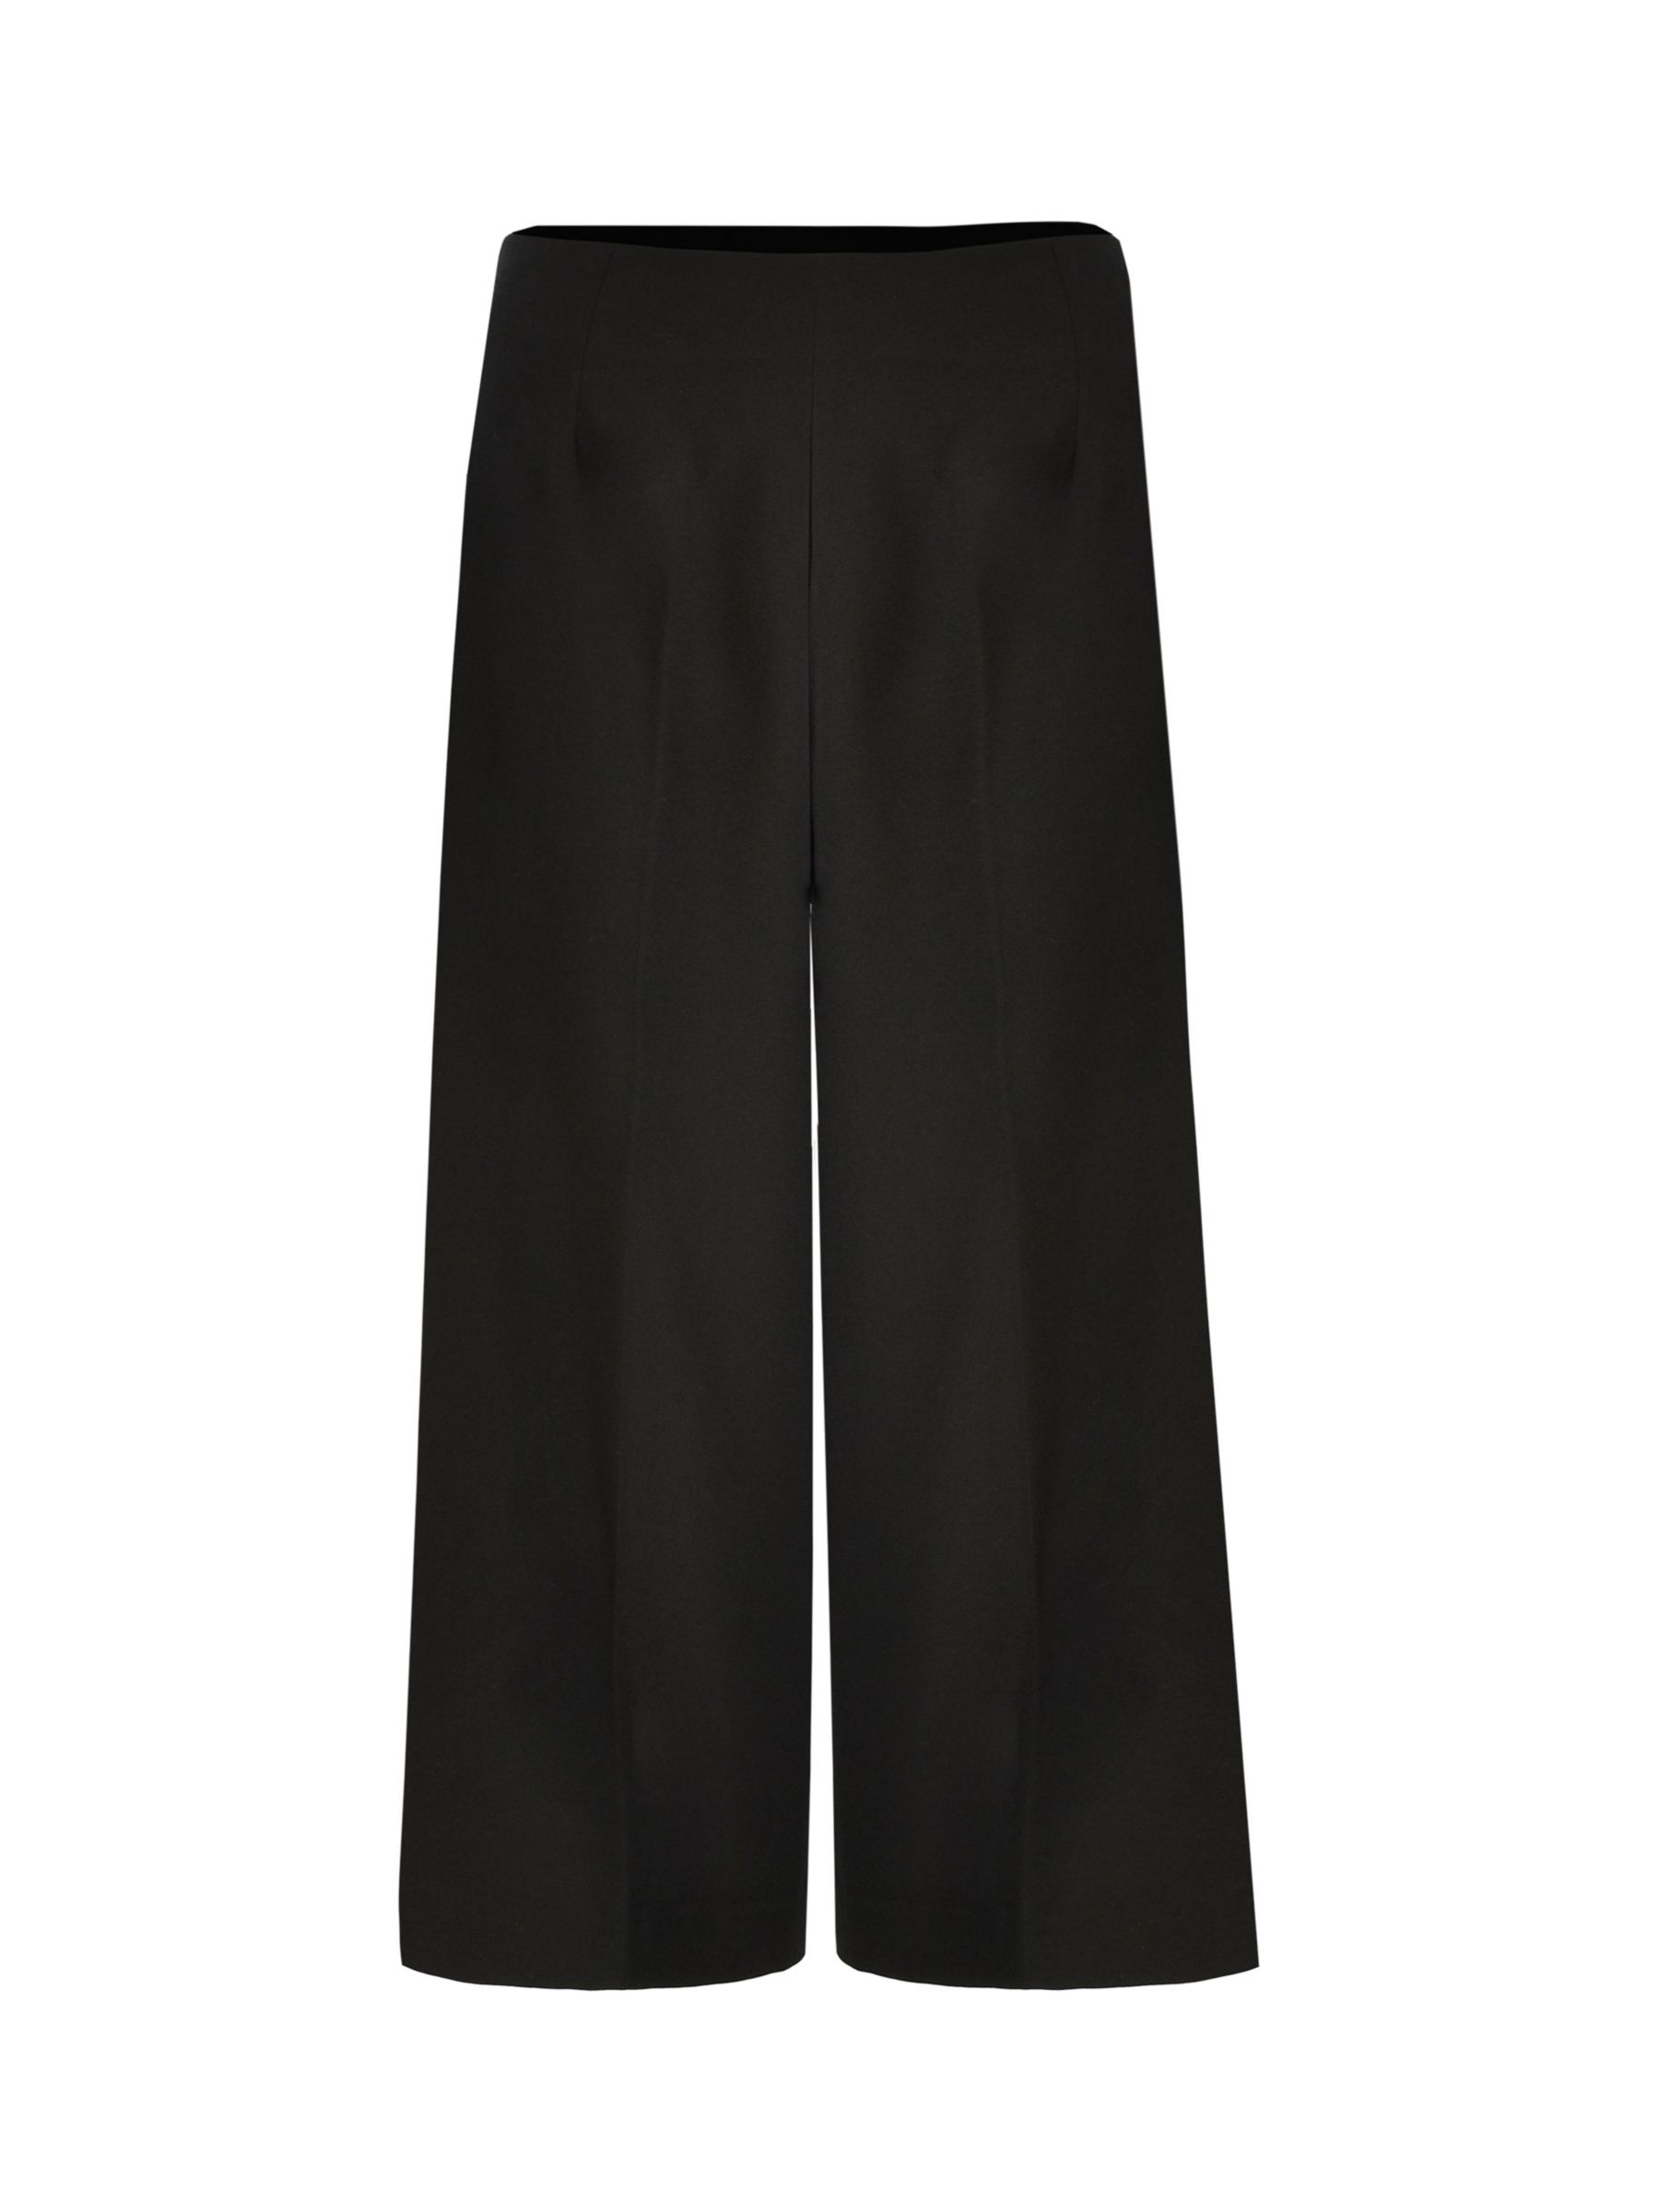 Ro&Zo Cropped Culottes, Black at John Lewis & Partners